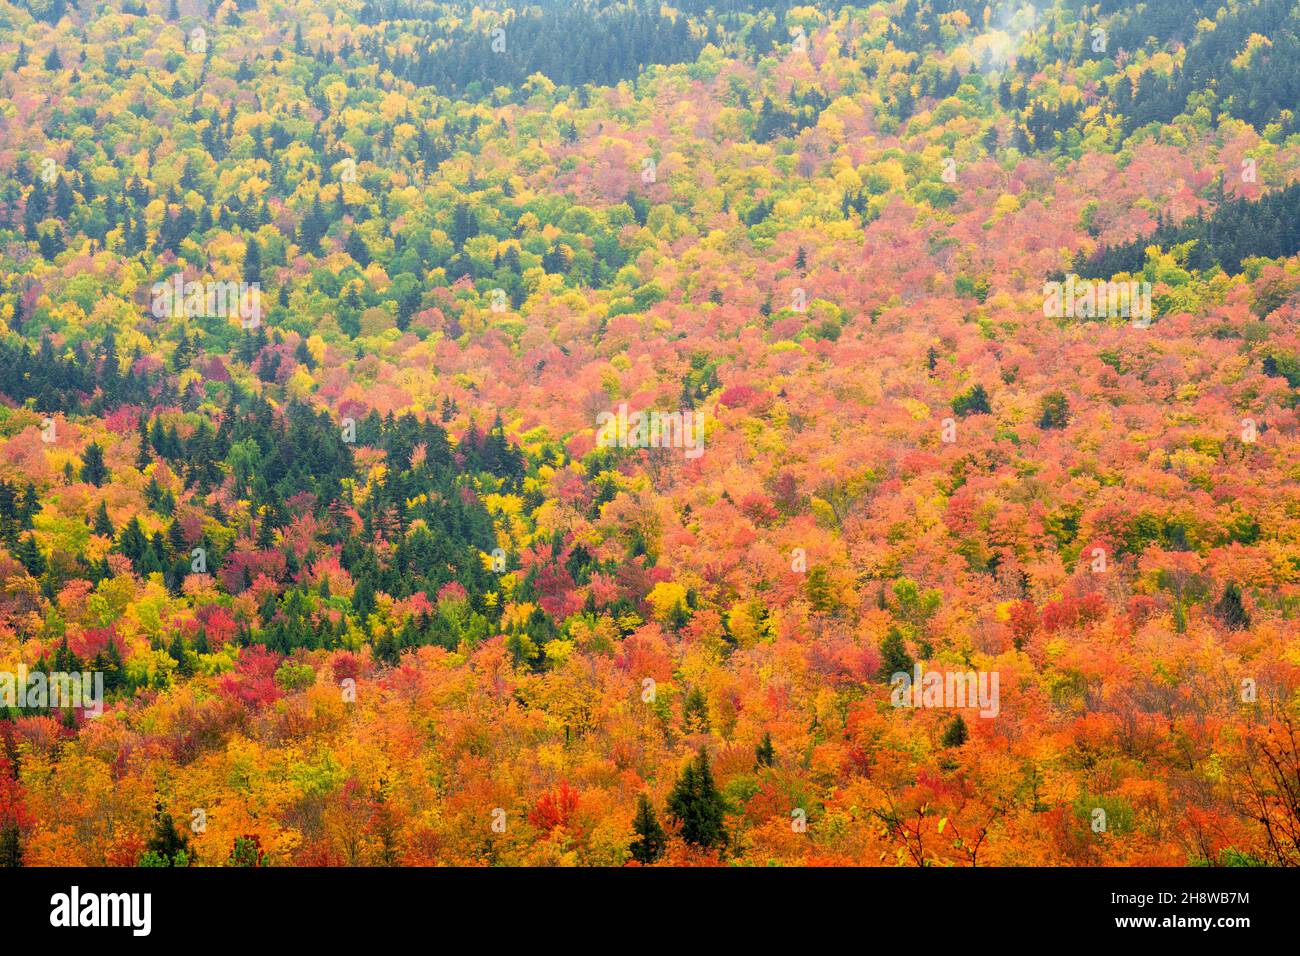 Autumn foliage in the deciduous forest on New England hillsides, Along US 2, New Hampshire, USA Stock Photo